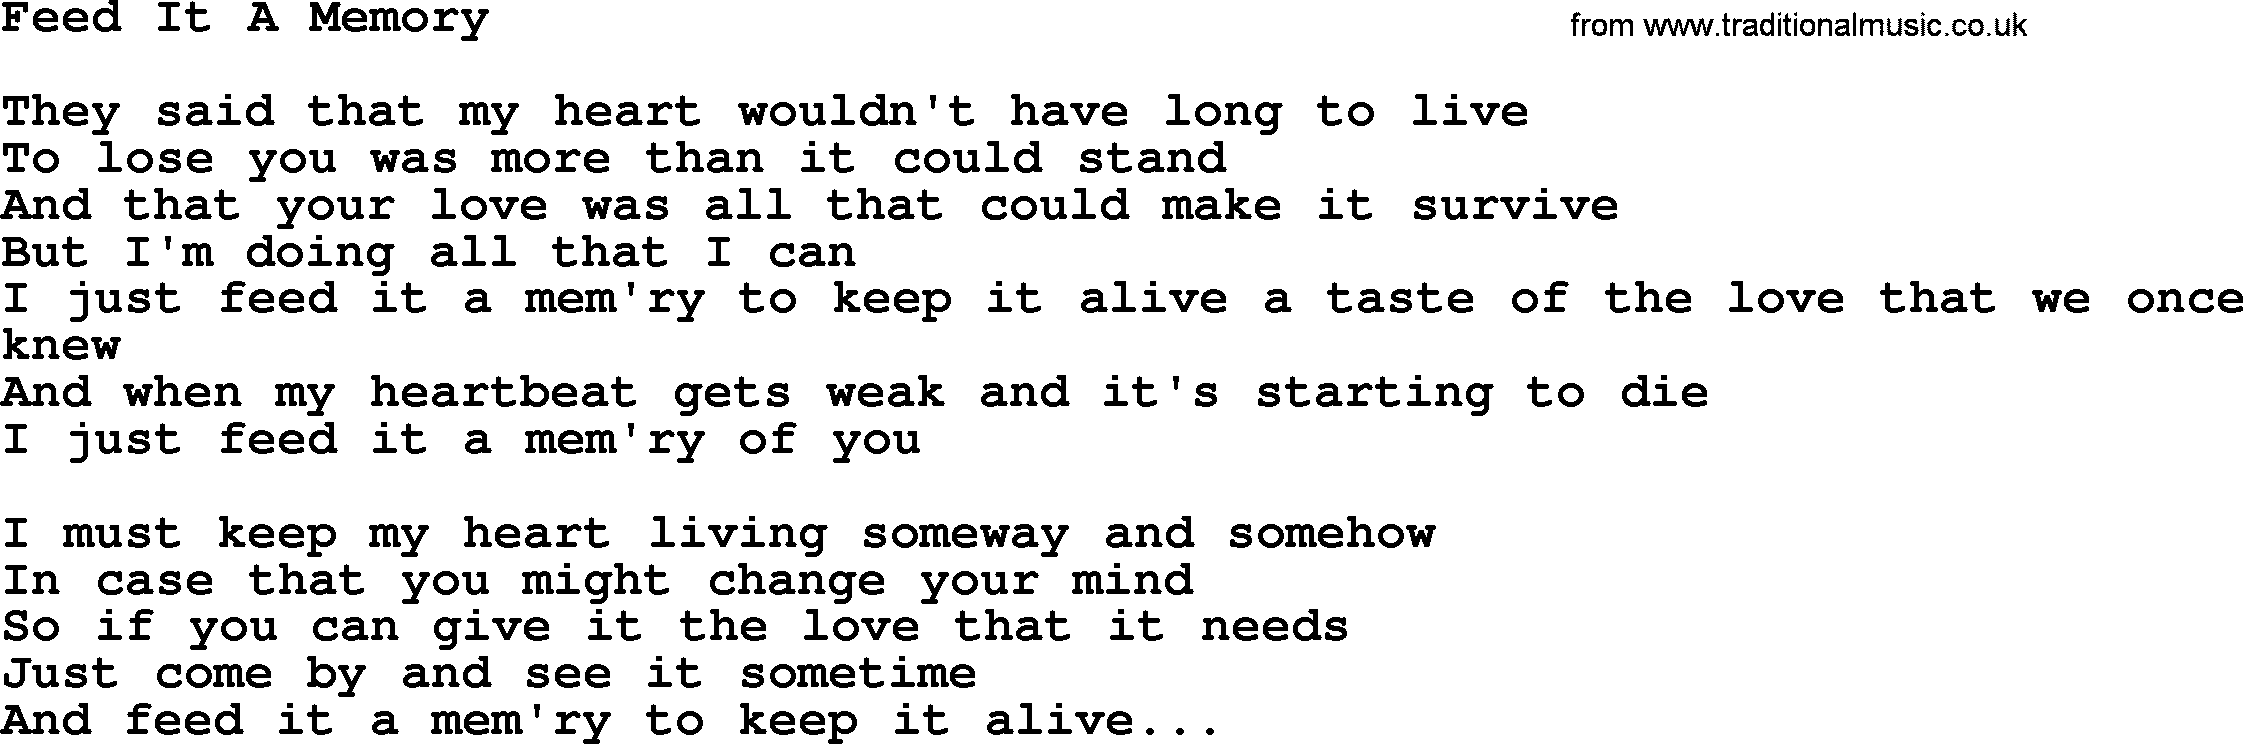 Willie Nelson song: Feed It A Memory lyrics